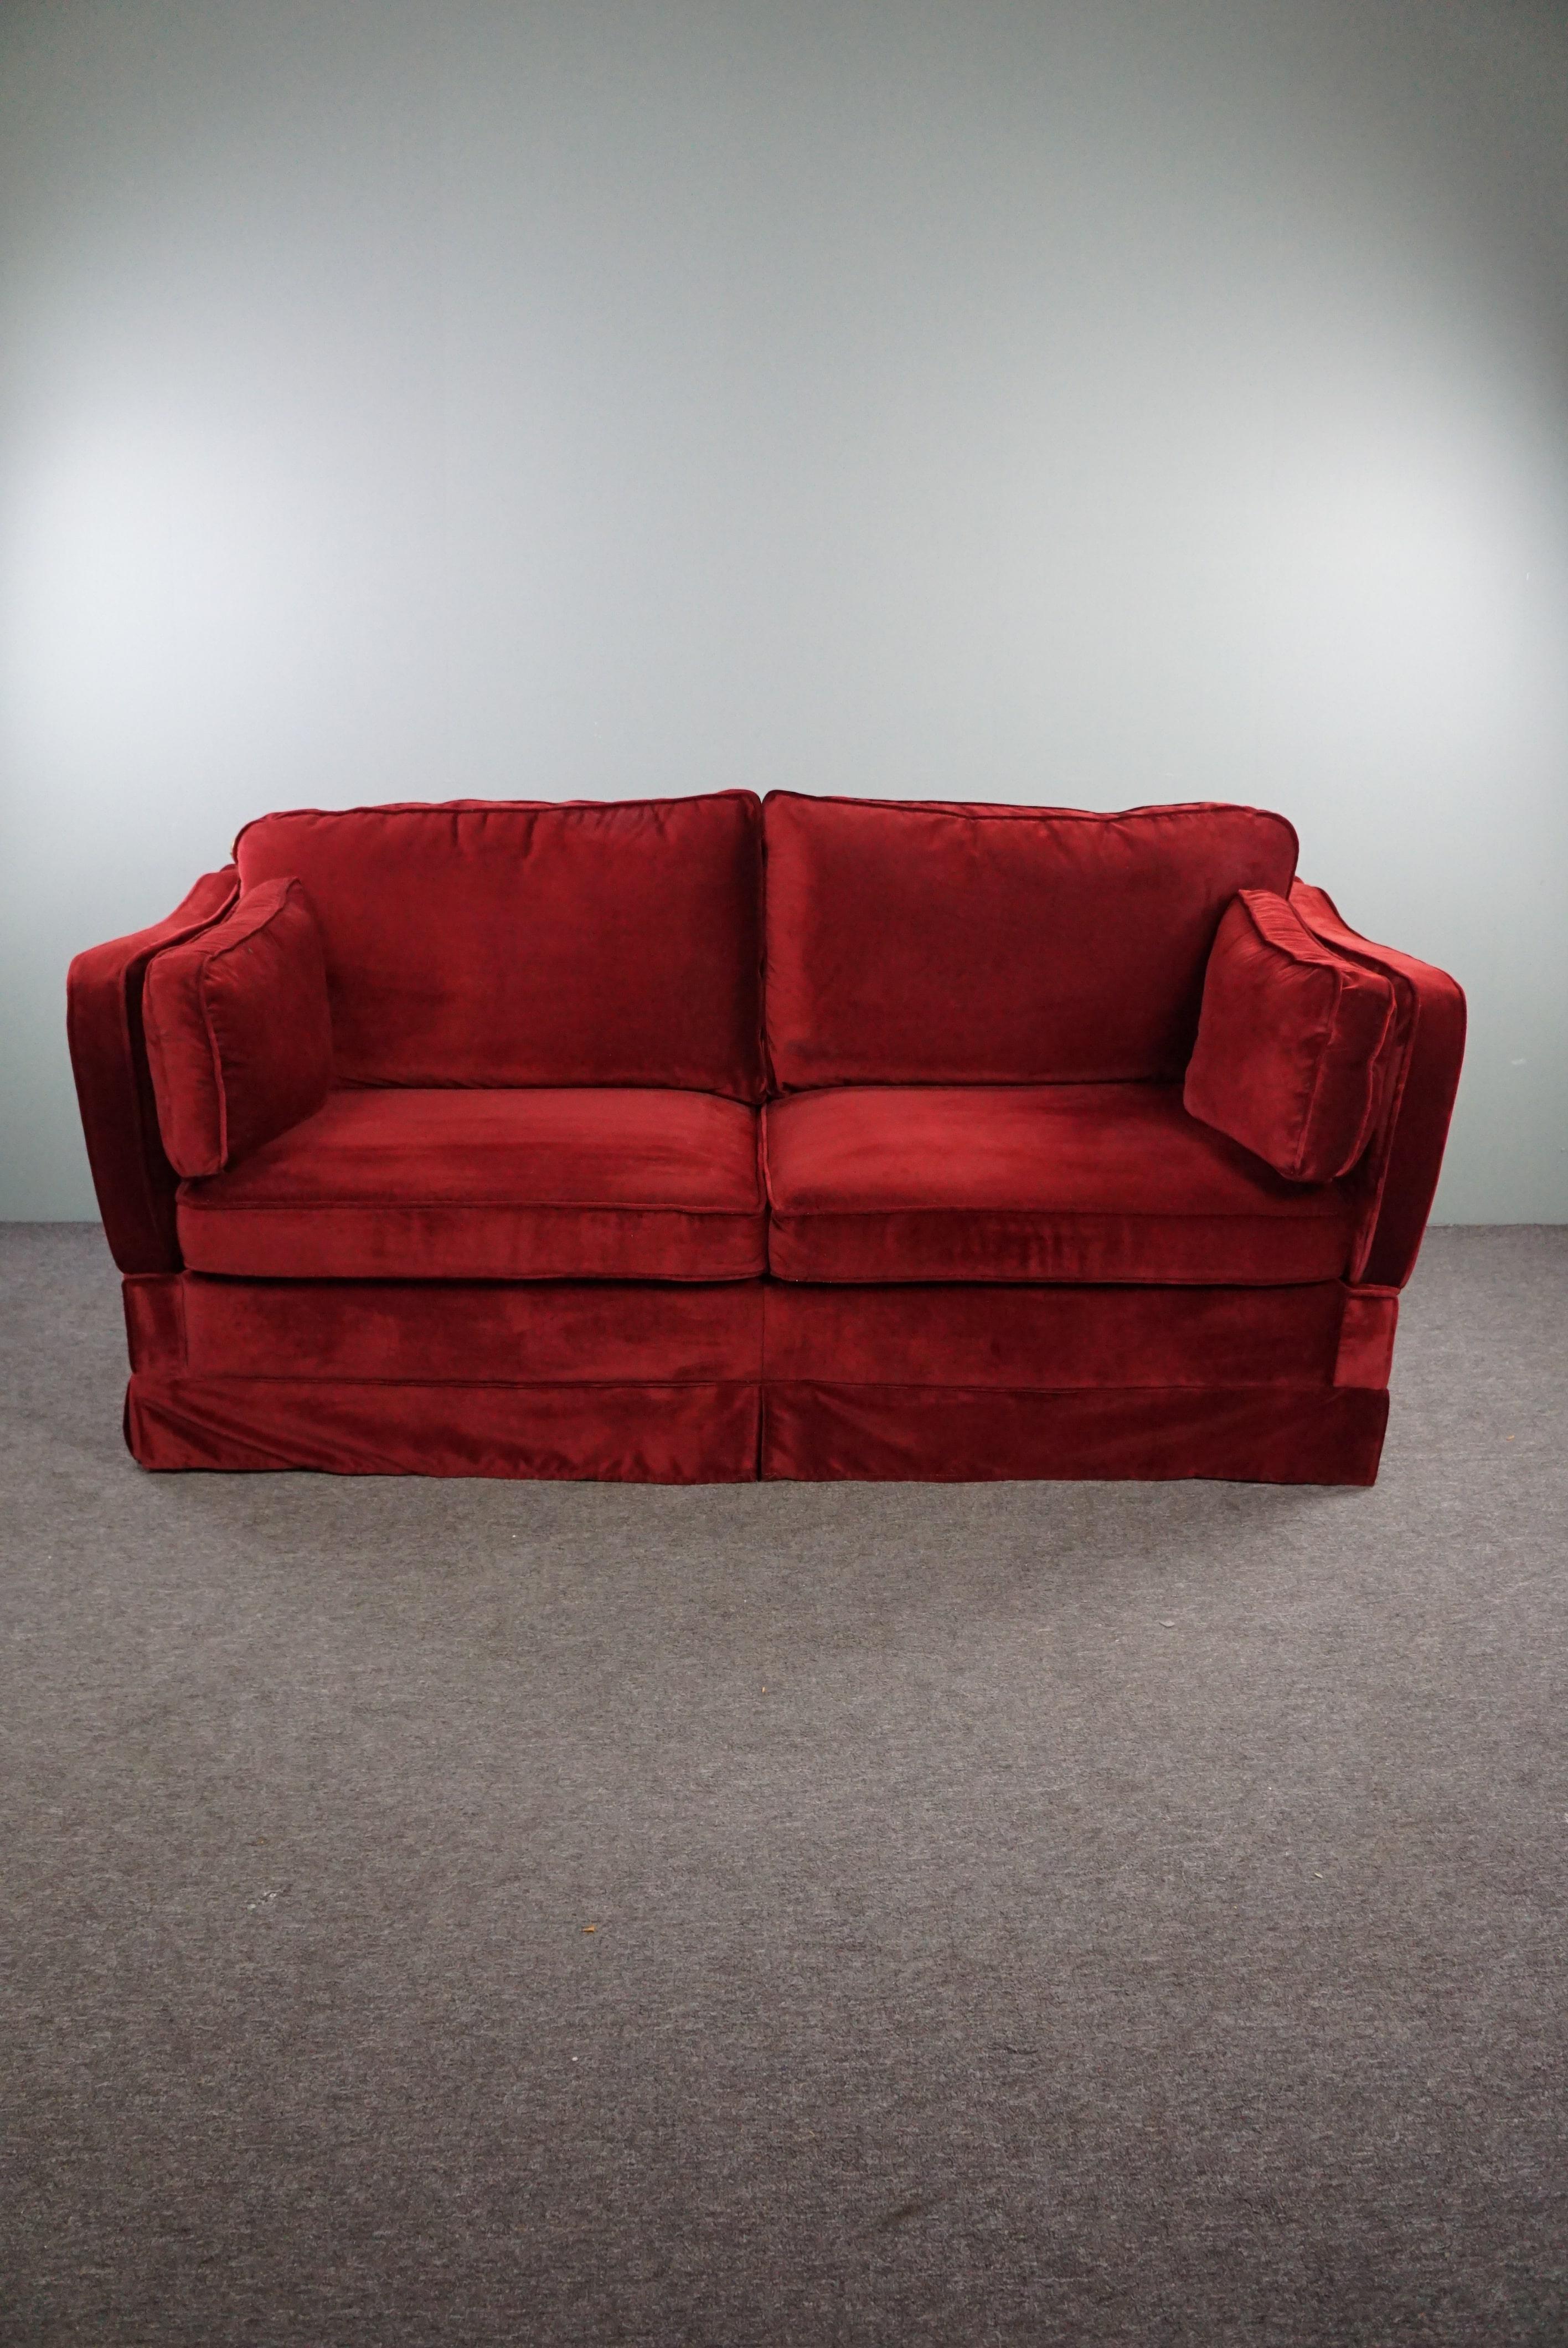 Offered is this velvet sofa with adjustable armrests in a beautiful deep red color.

With its deep red color and adjustable armrests, this sofa is a striking item. Place it in the middle of a room or against a wall where there is space to adjust the